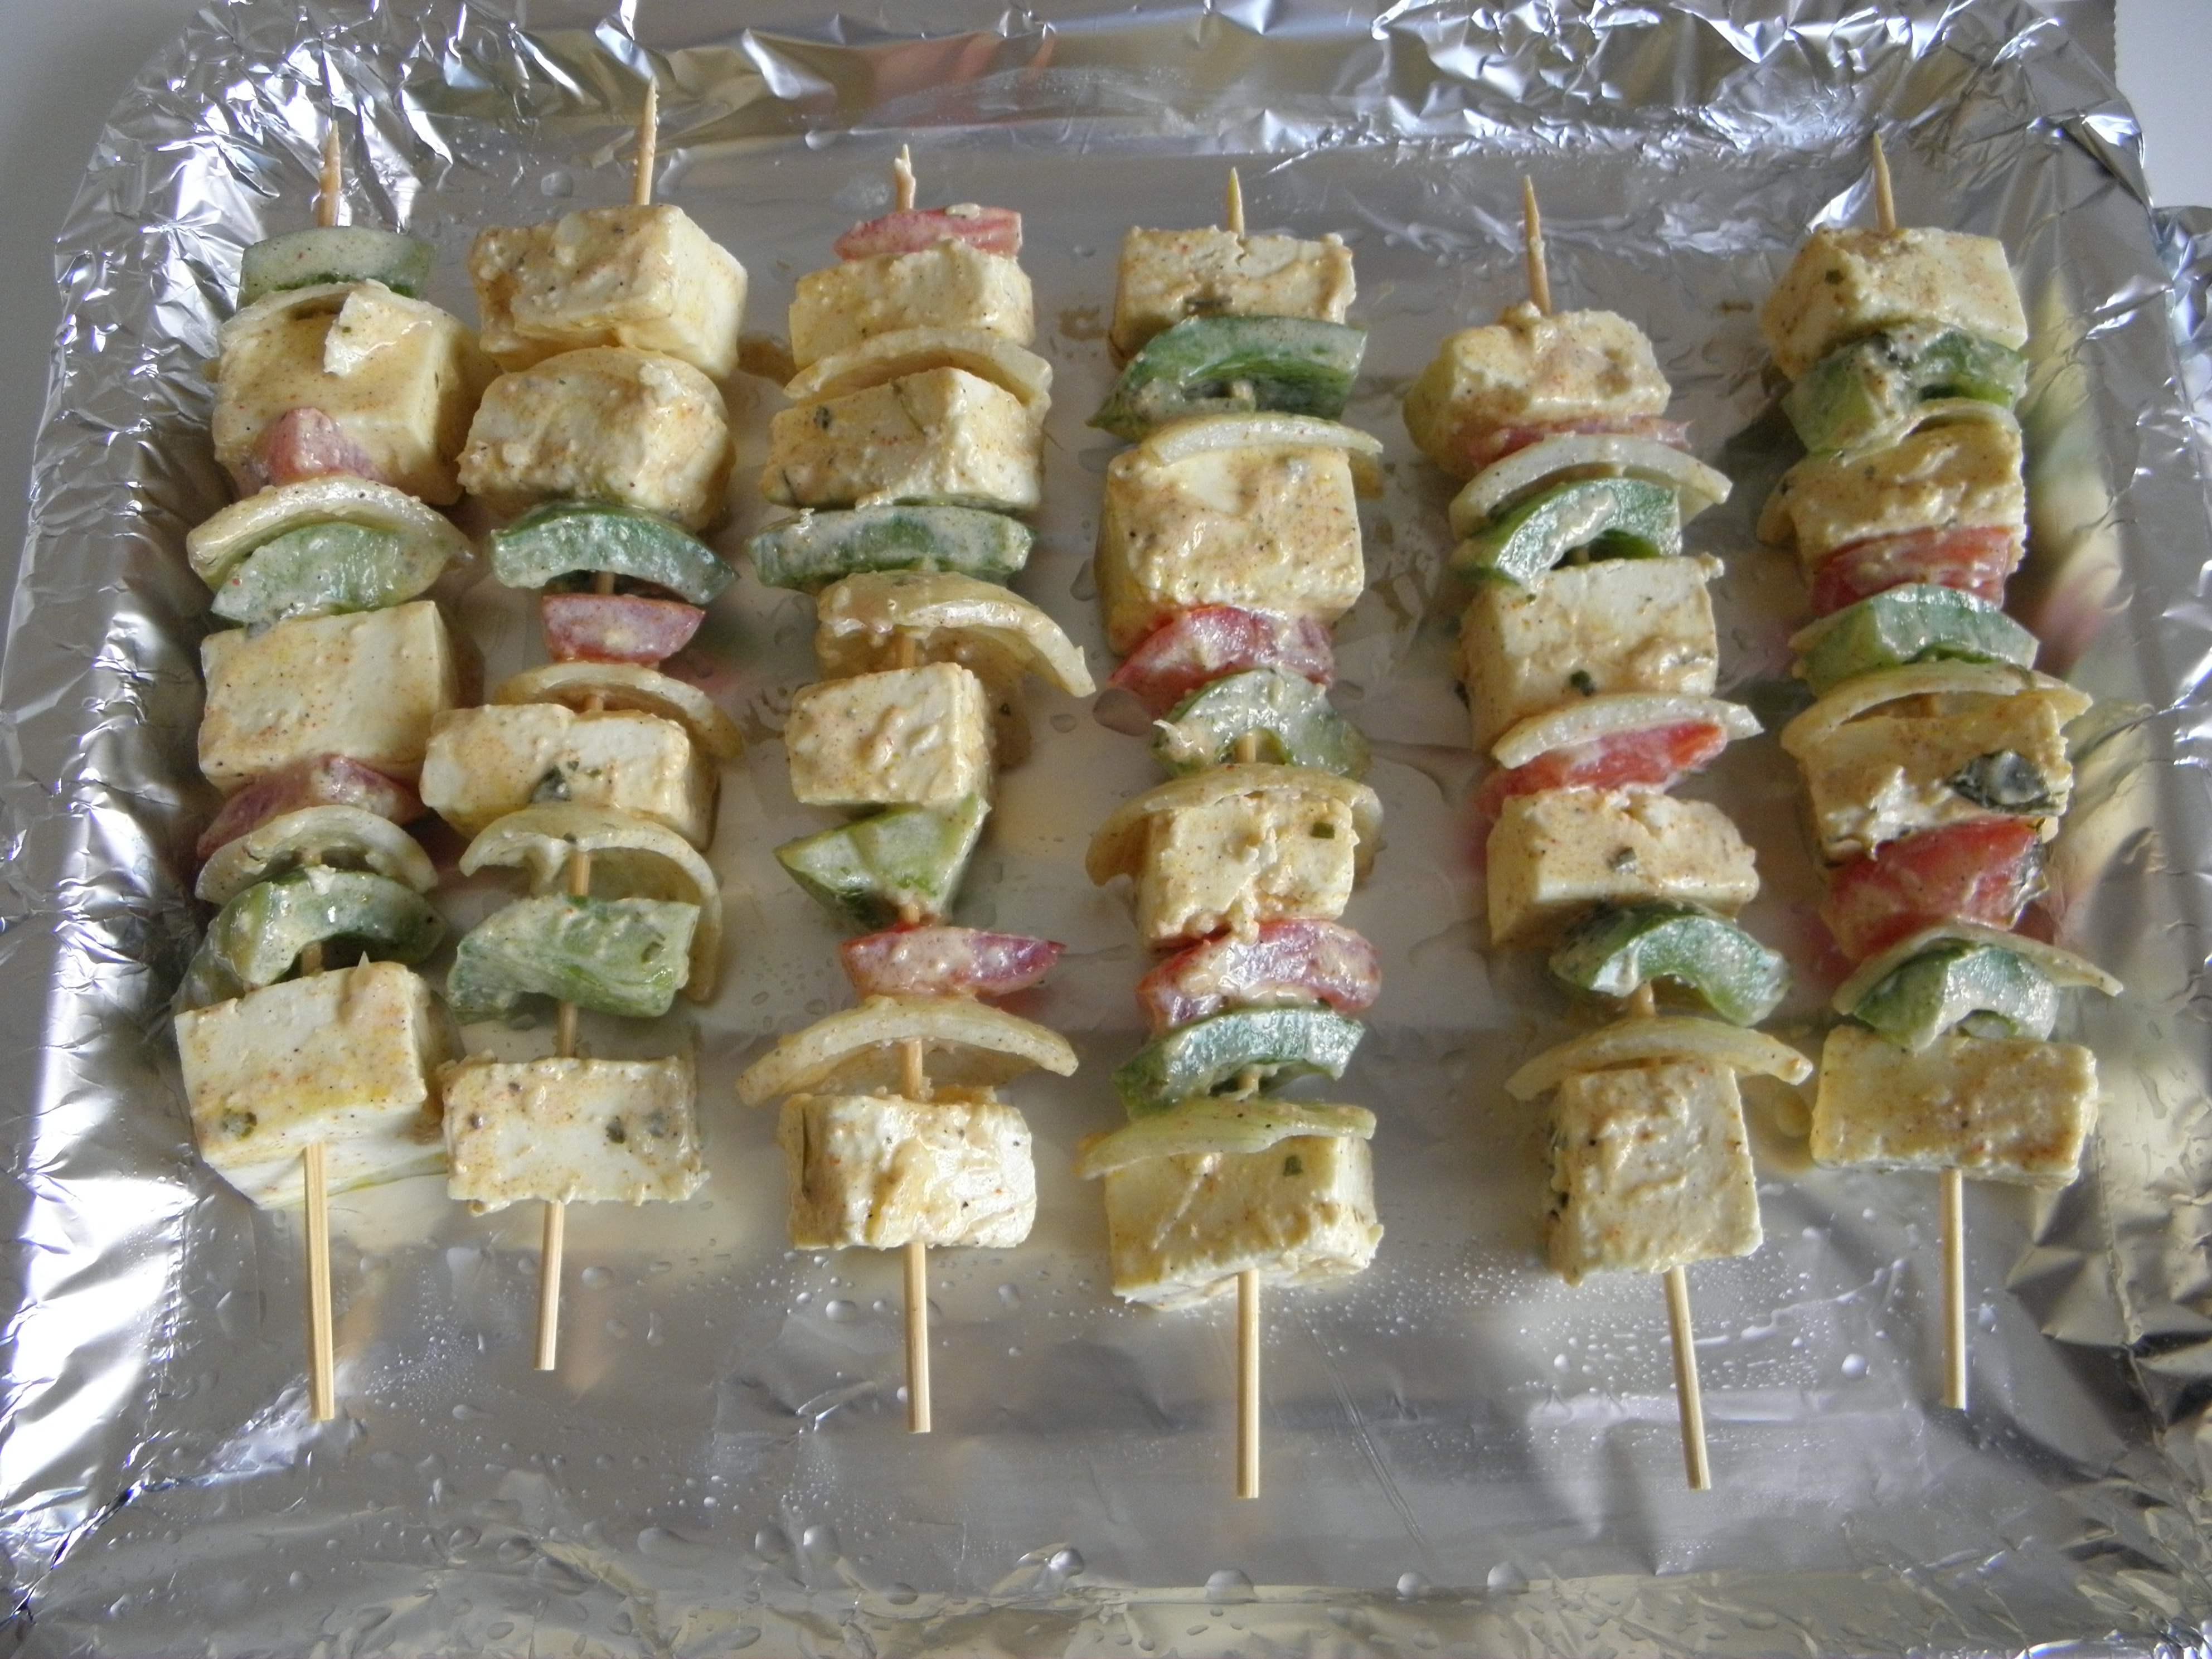 Skewers are ready to go into the oven